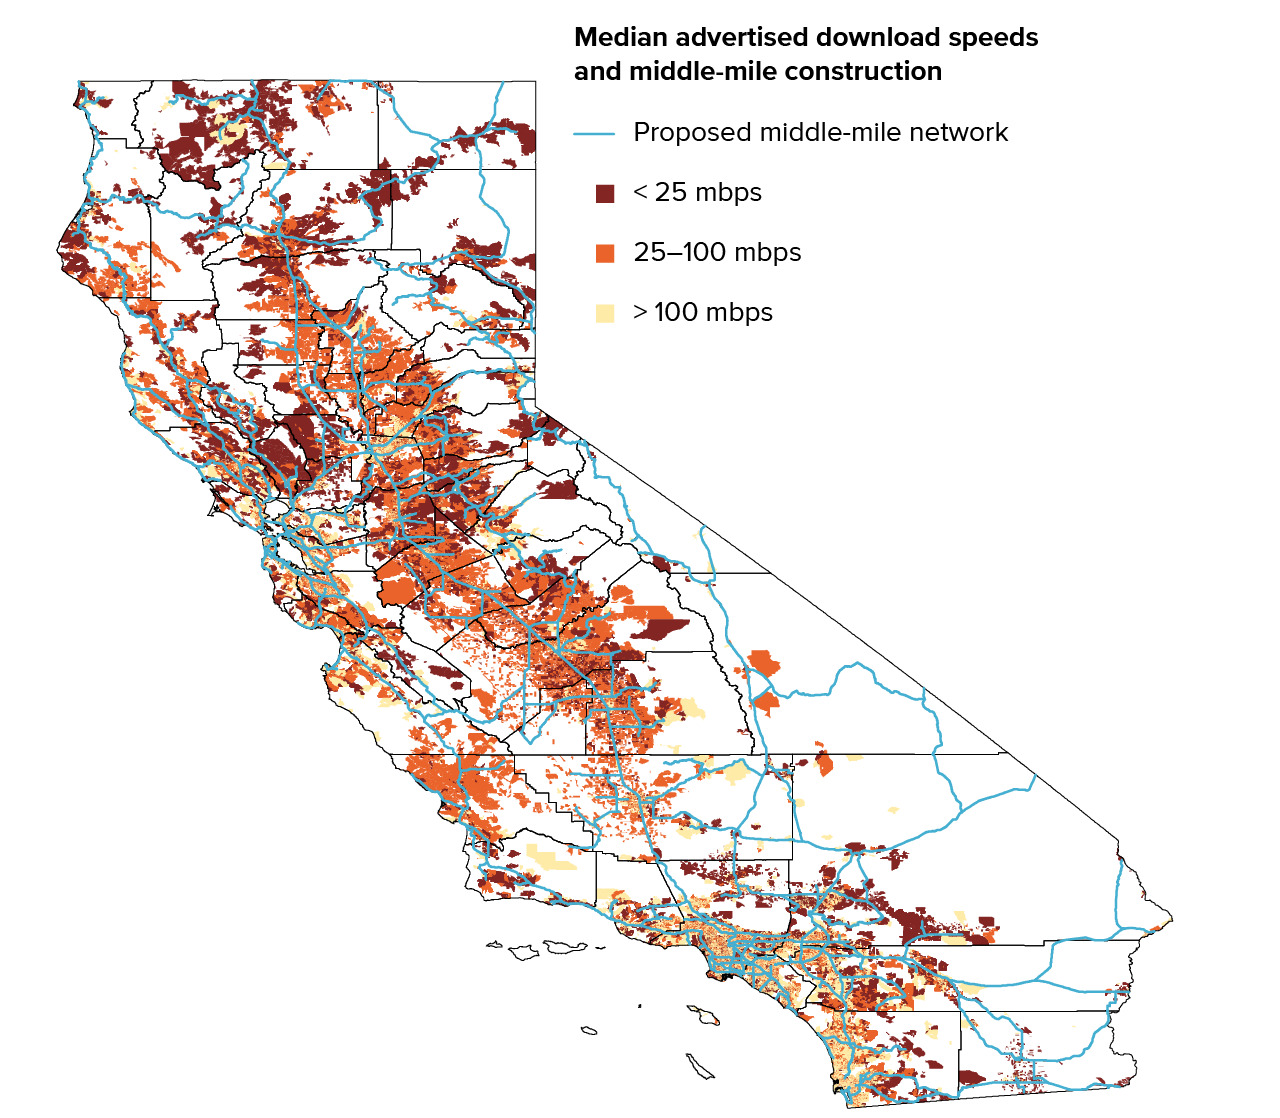 figure - California’s proposed middle-mile network prioritizes unserved and underserved areas